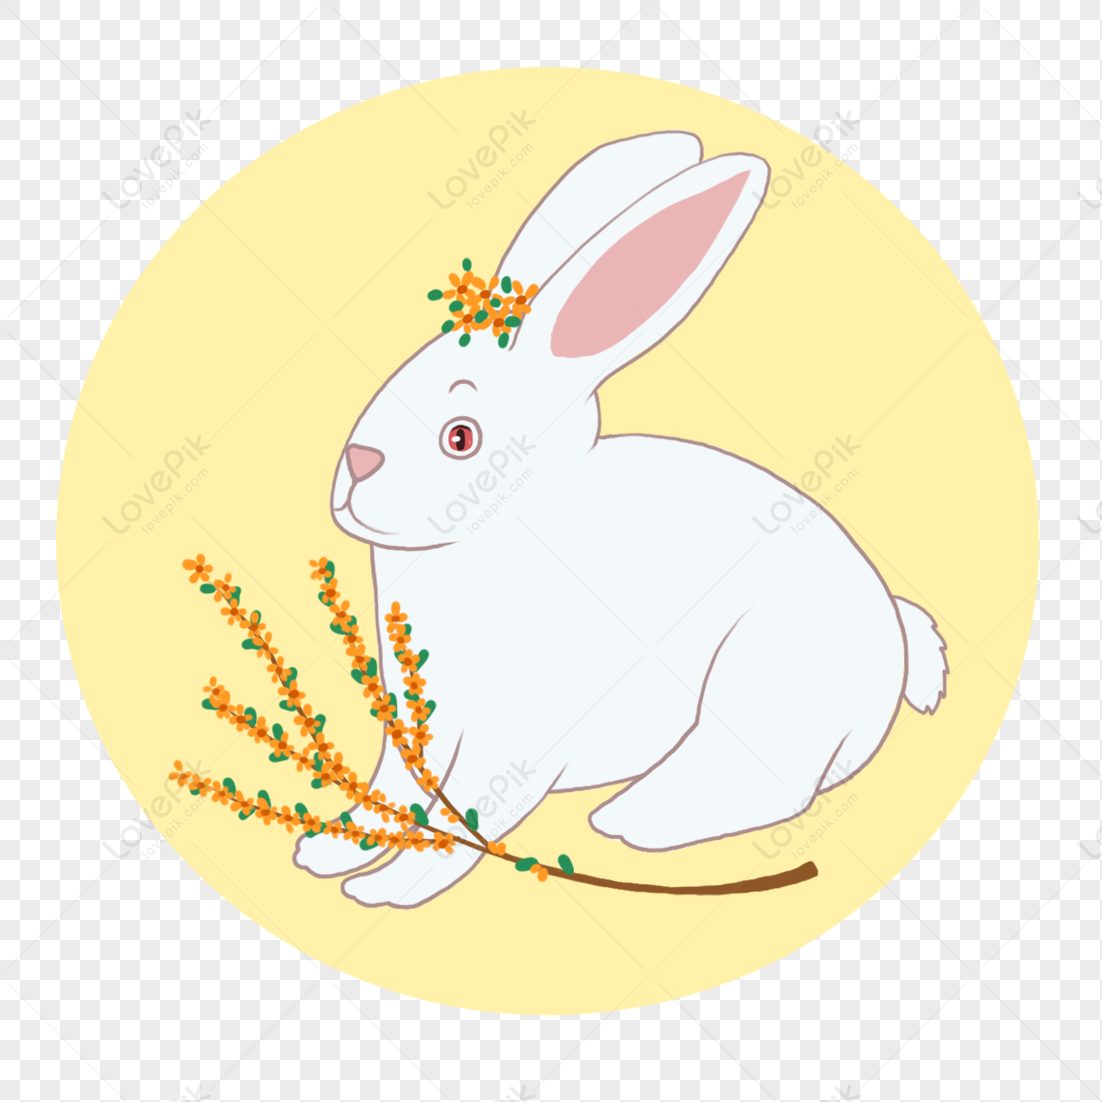 Commercial Cartoon White Rabbit PNG Image And Clipart Image For Free  Download - Lovepik | 401494808